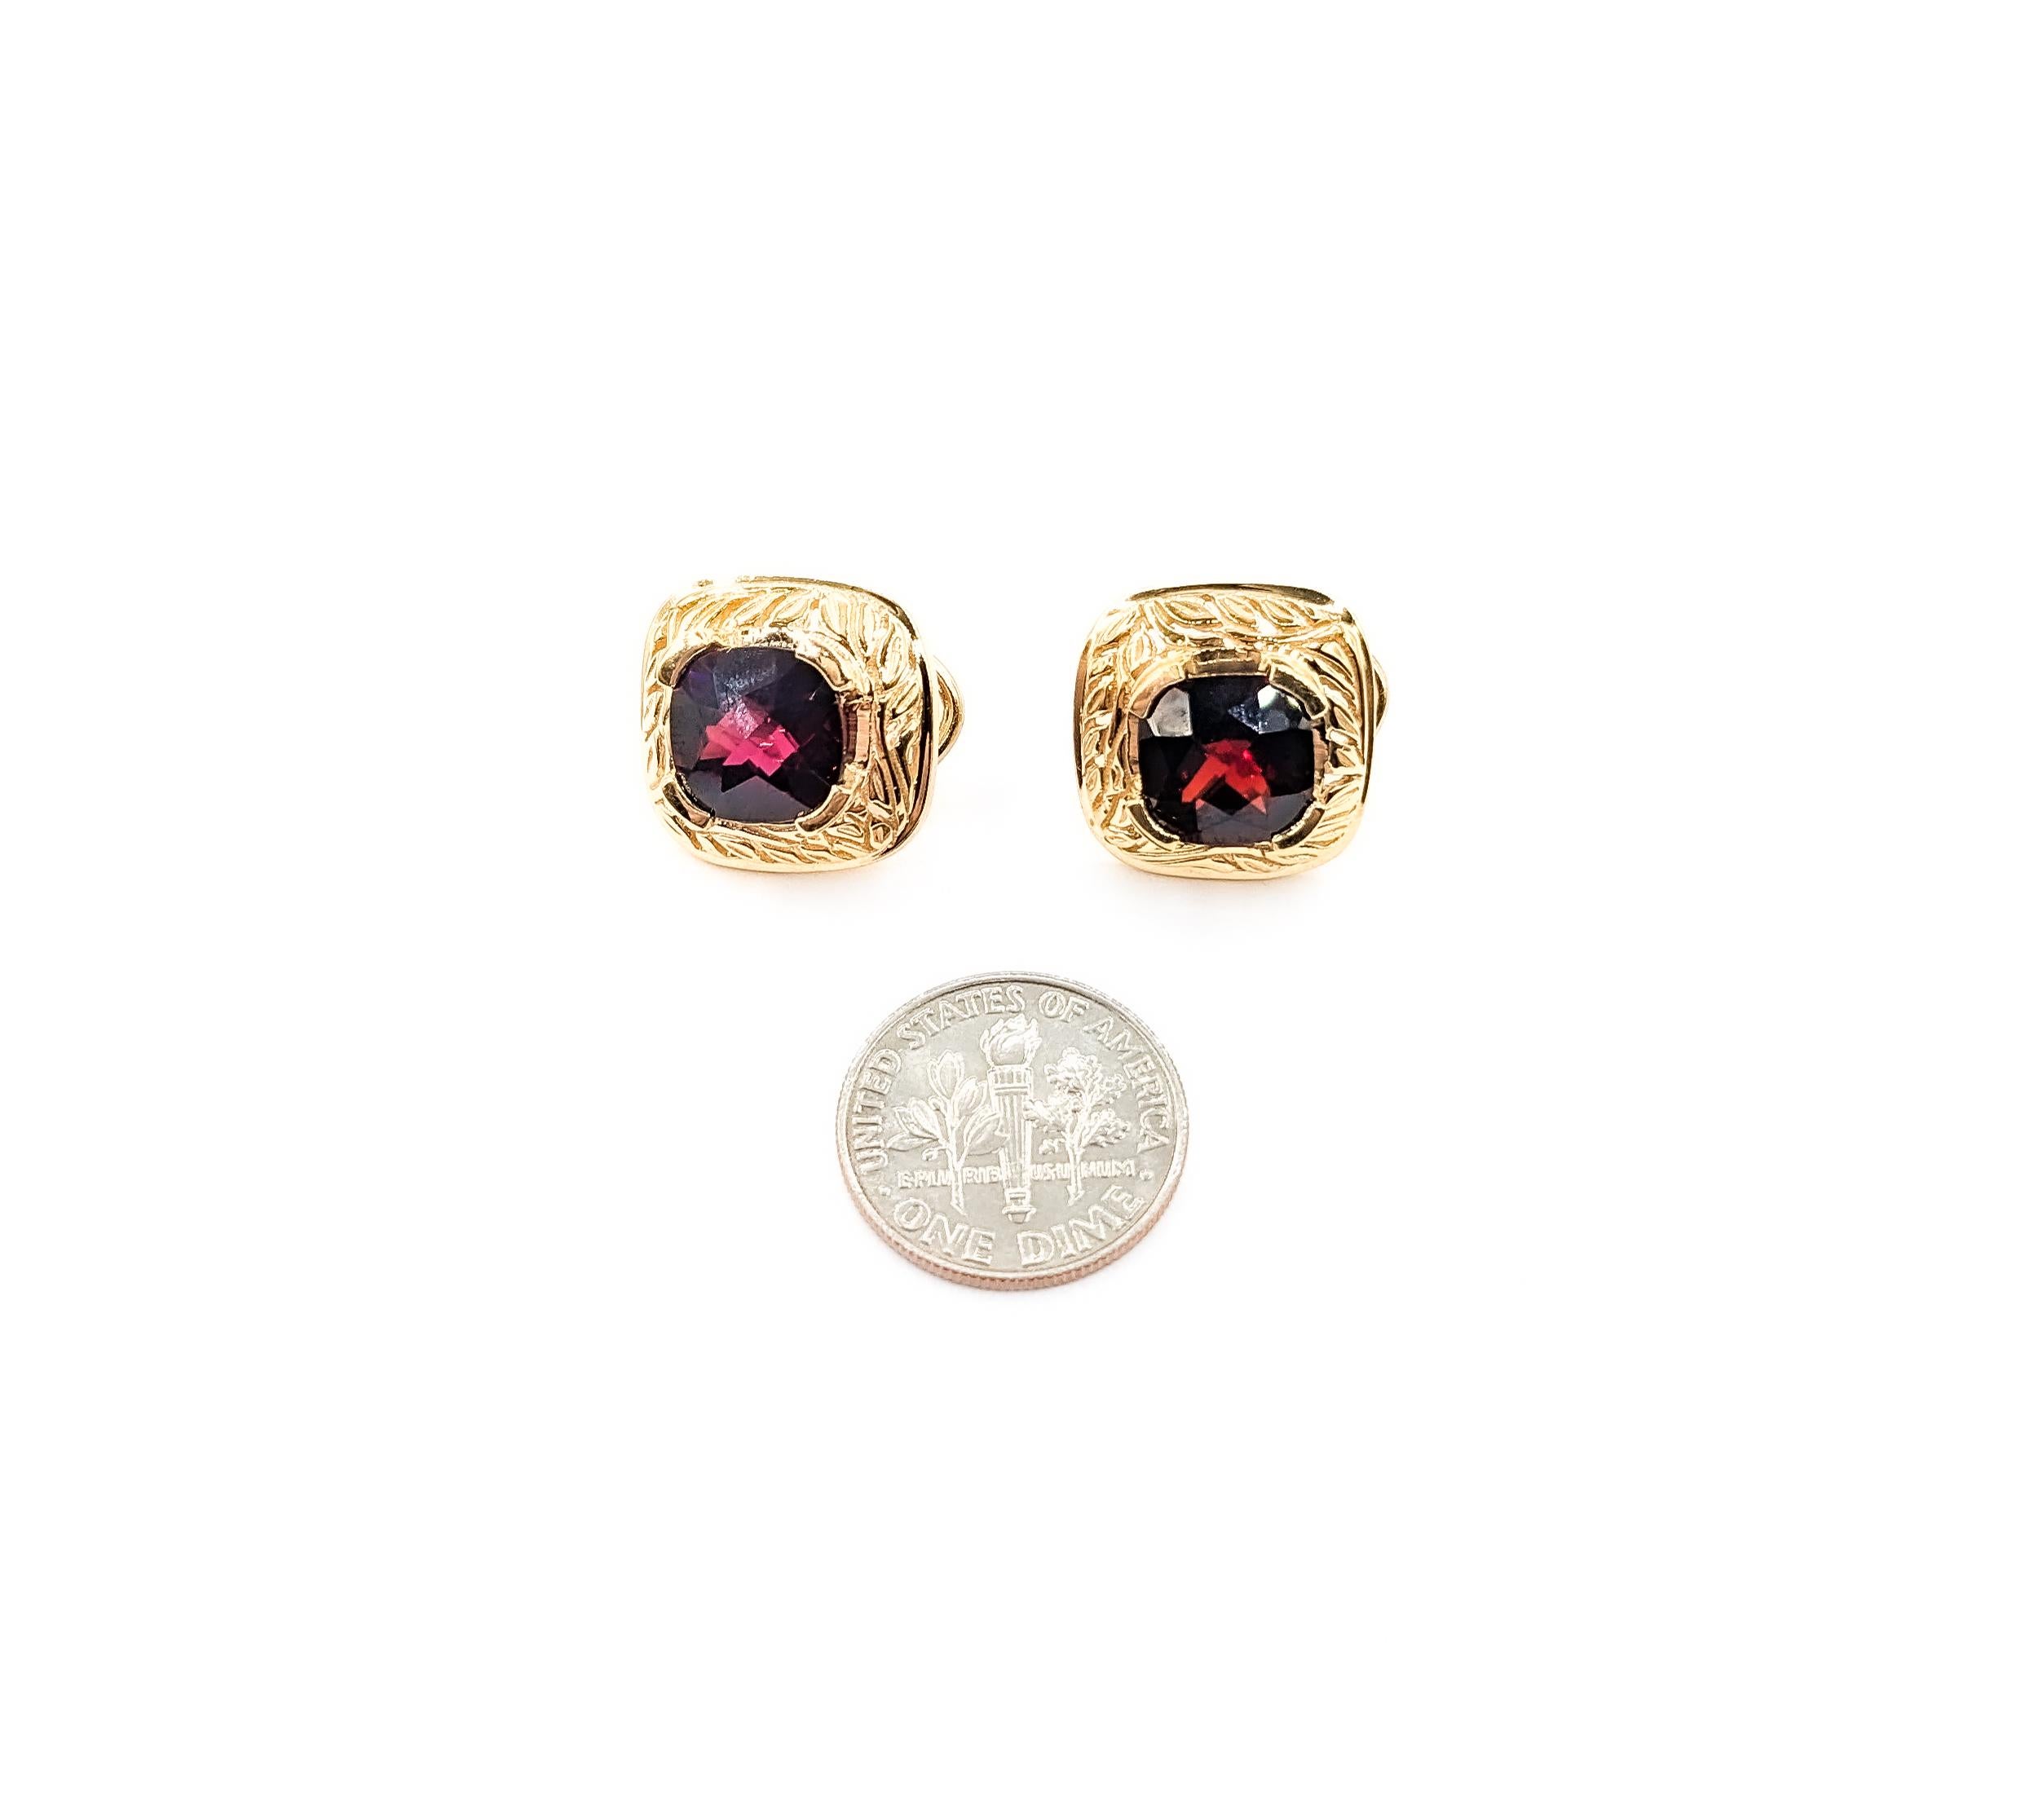 6.50ctw Garnets Stud Earrings In Yellow Gold

These beautiful gemstone fashion earrings, meticulously crafted in 14kt yellow gold, feature a striking total of 6.50ctw garnets, known for their deep, rich color and vibrant appeal. The earrings are